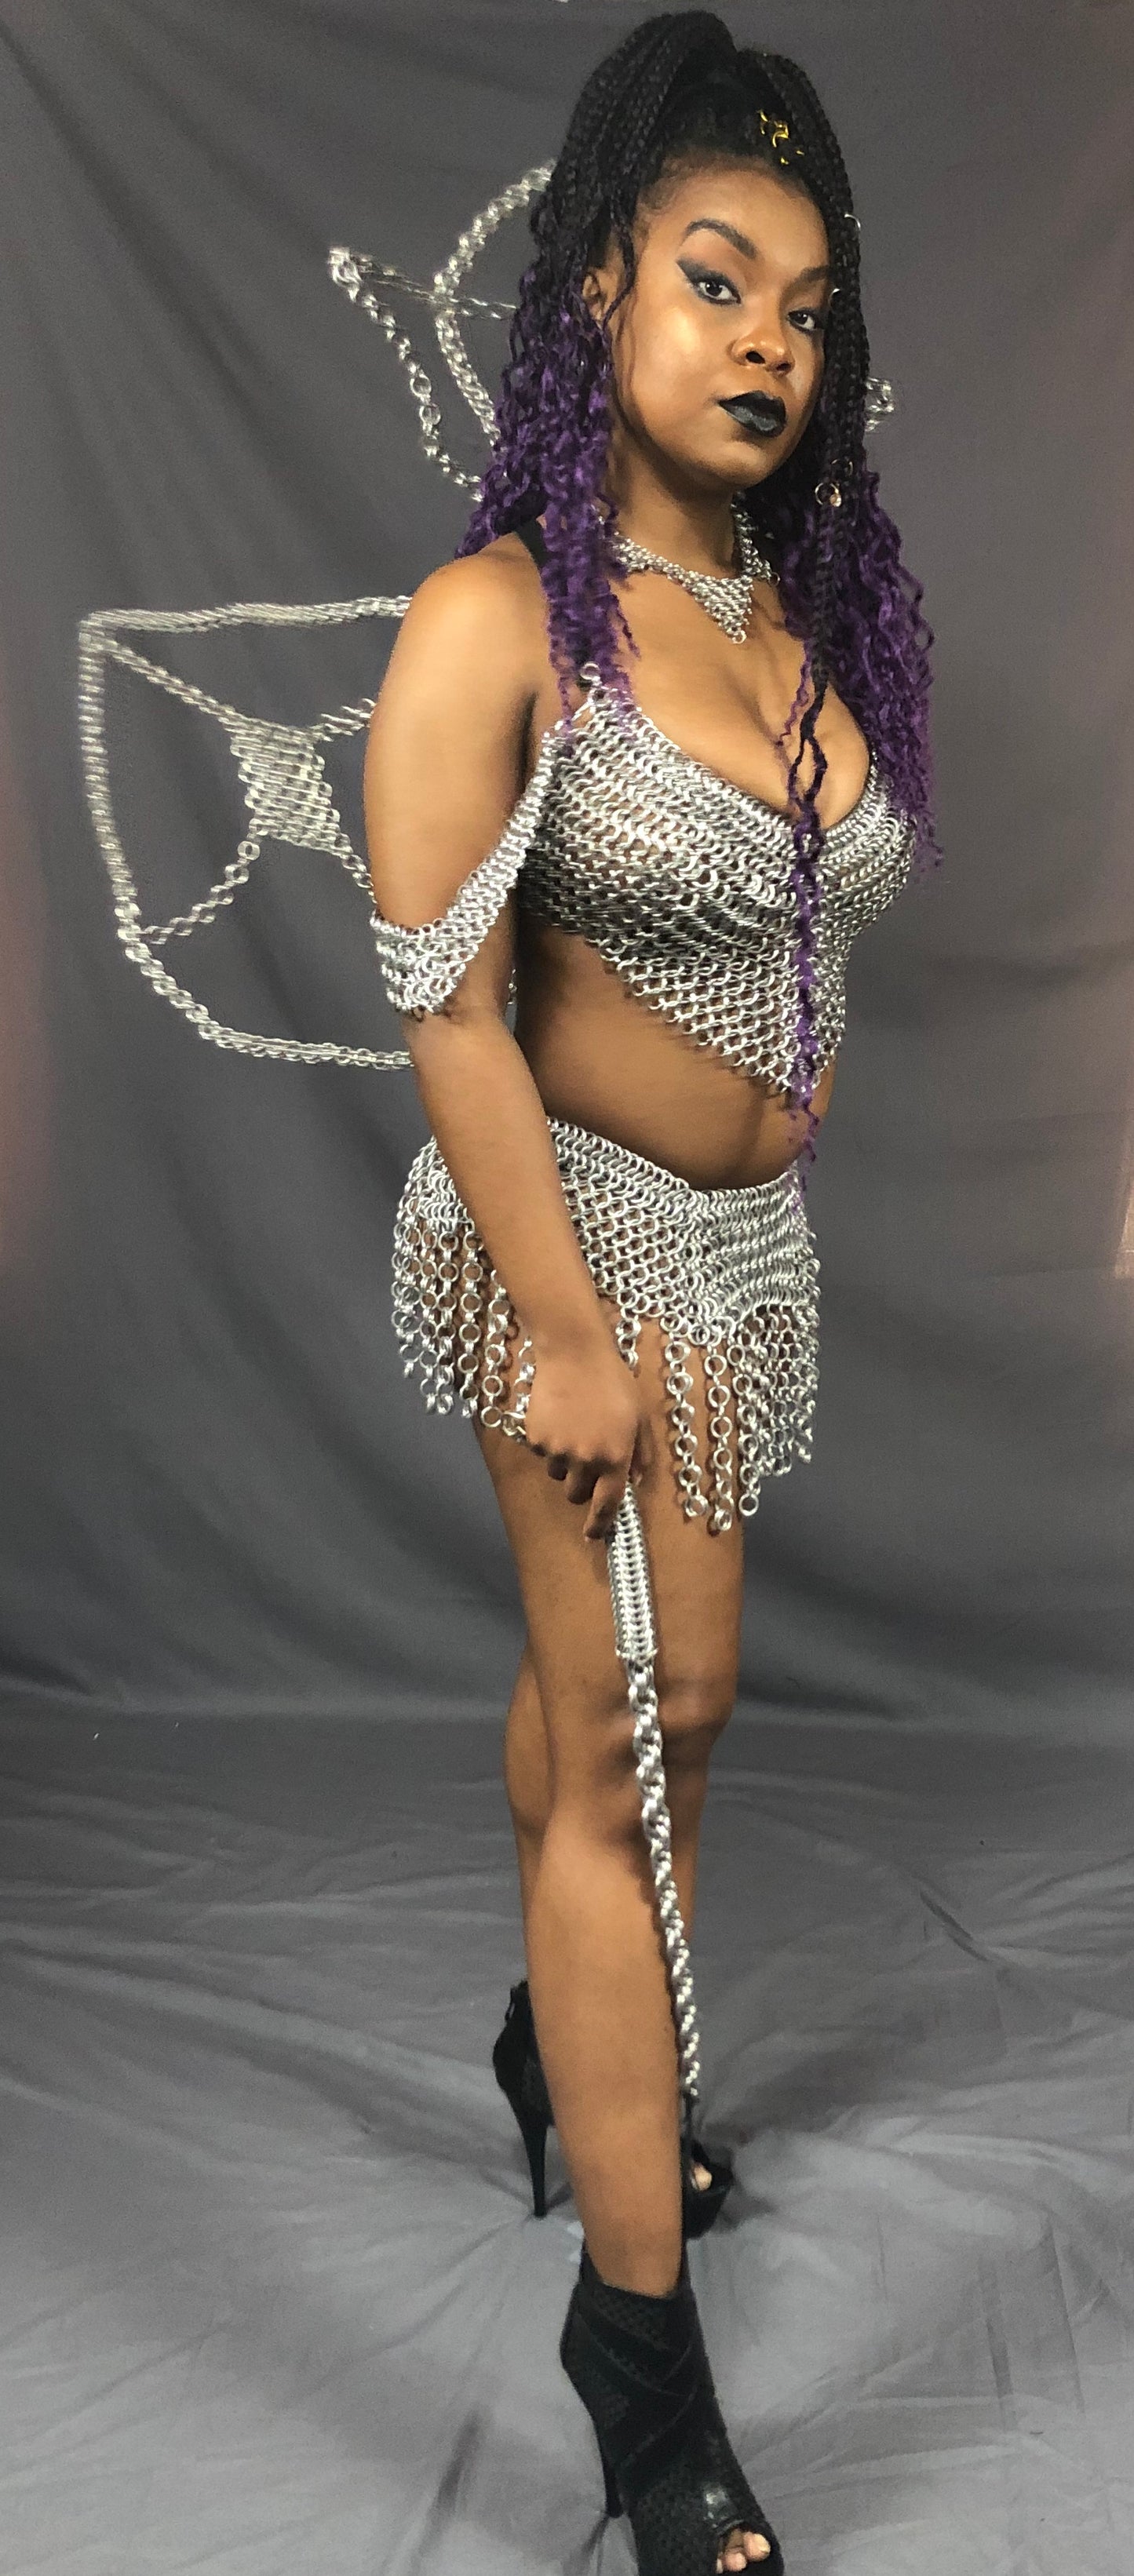 A model wearing a chainmail outfit posing with the Aluminum Chainmail Whip.